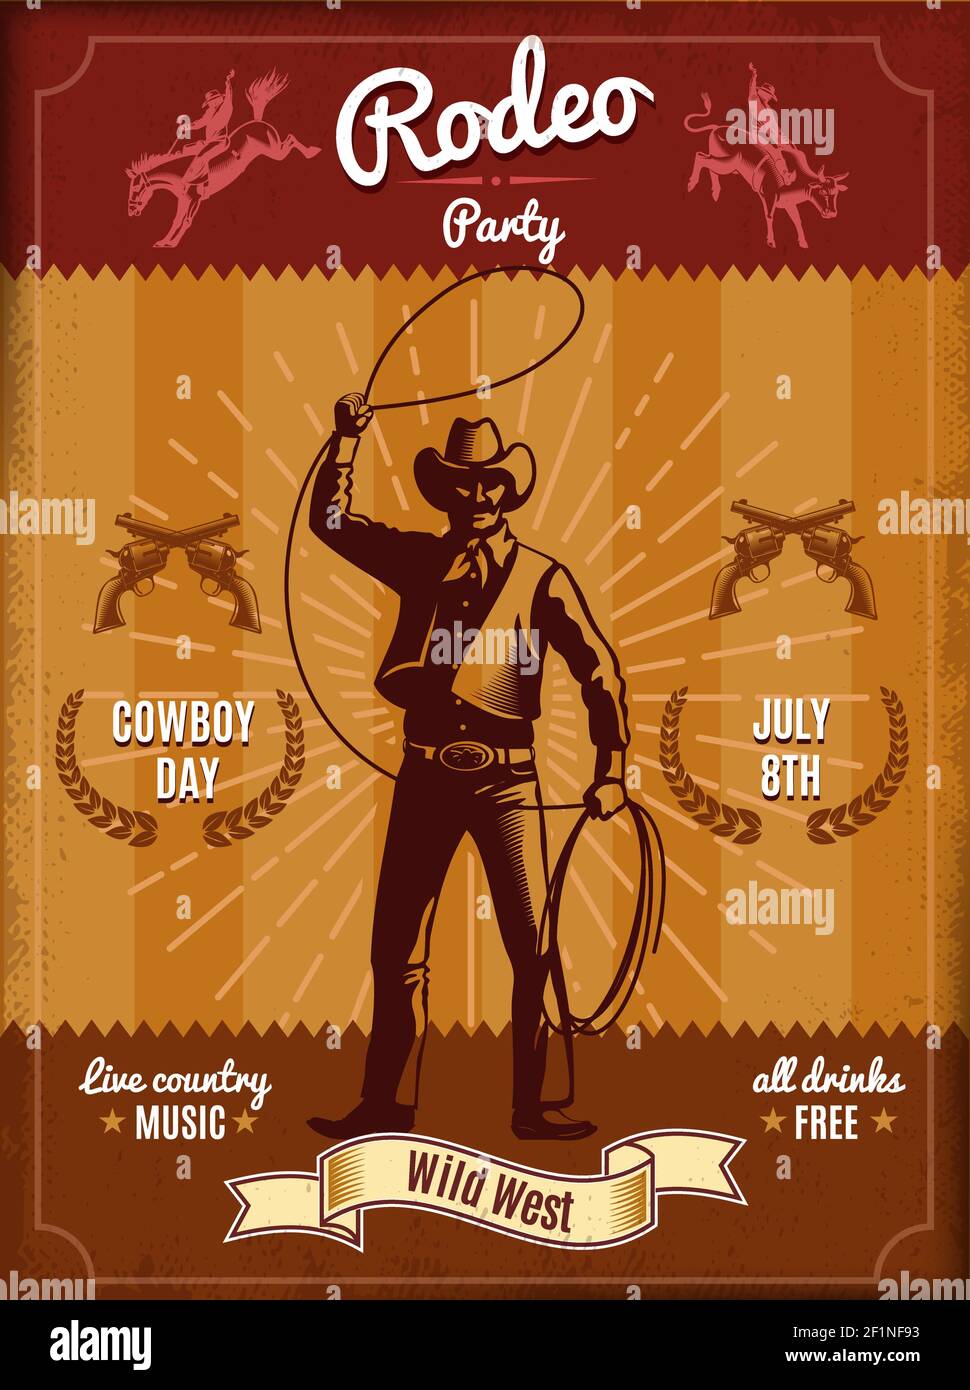 Vintage rodeo poster with cowboy throwing lasso and wild west elements Stock Vector